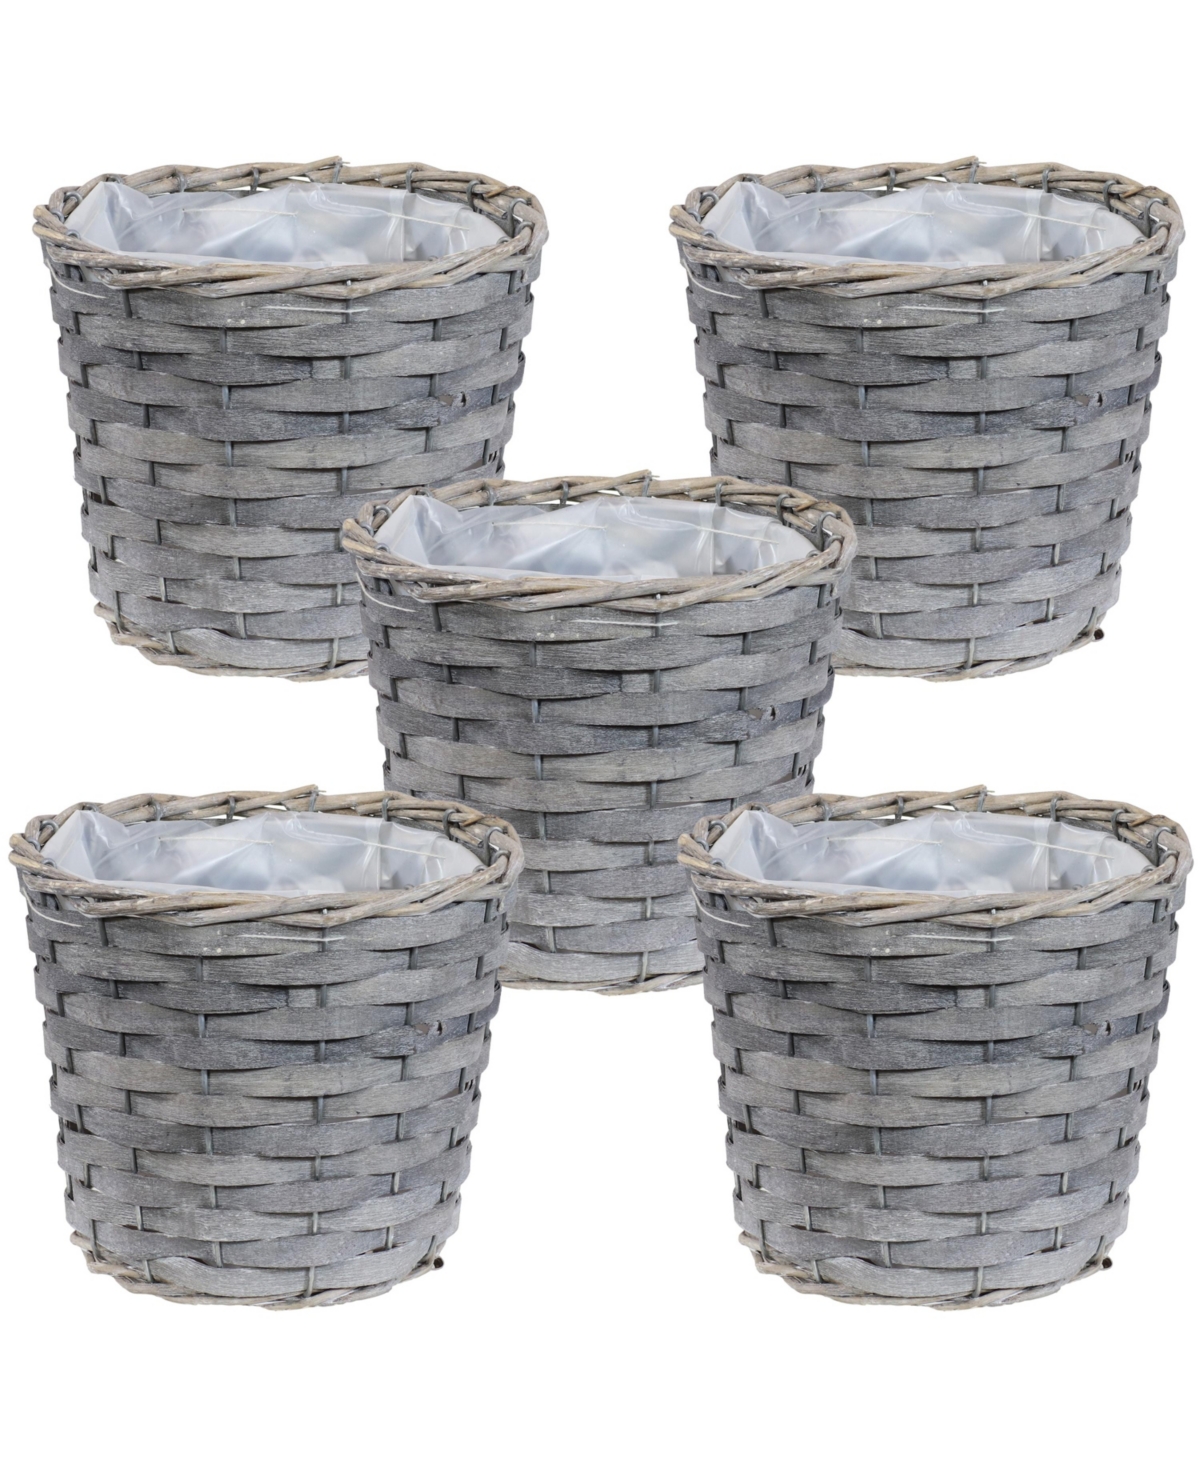 6.75 in Rattan Wicker Basket Planters with Lining - Set of 5 - Grey